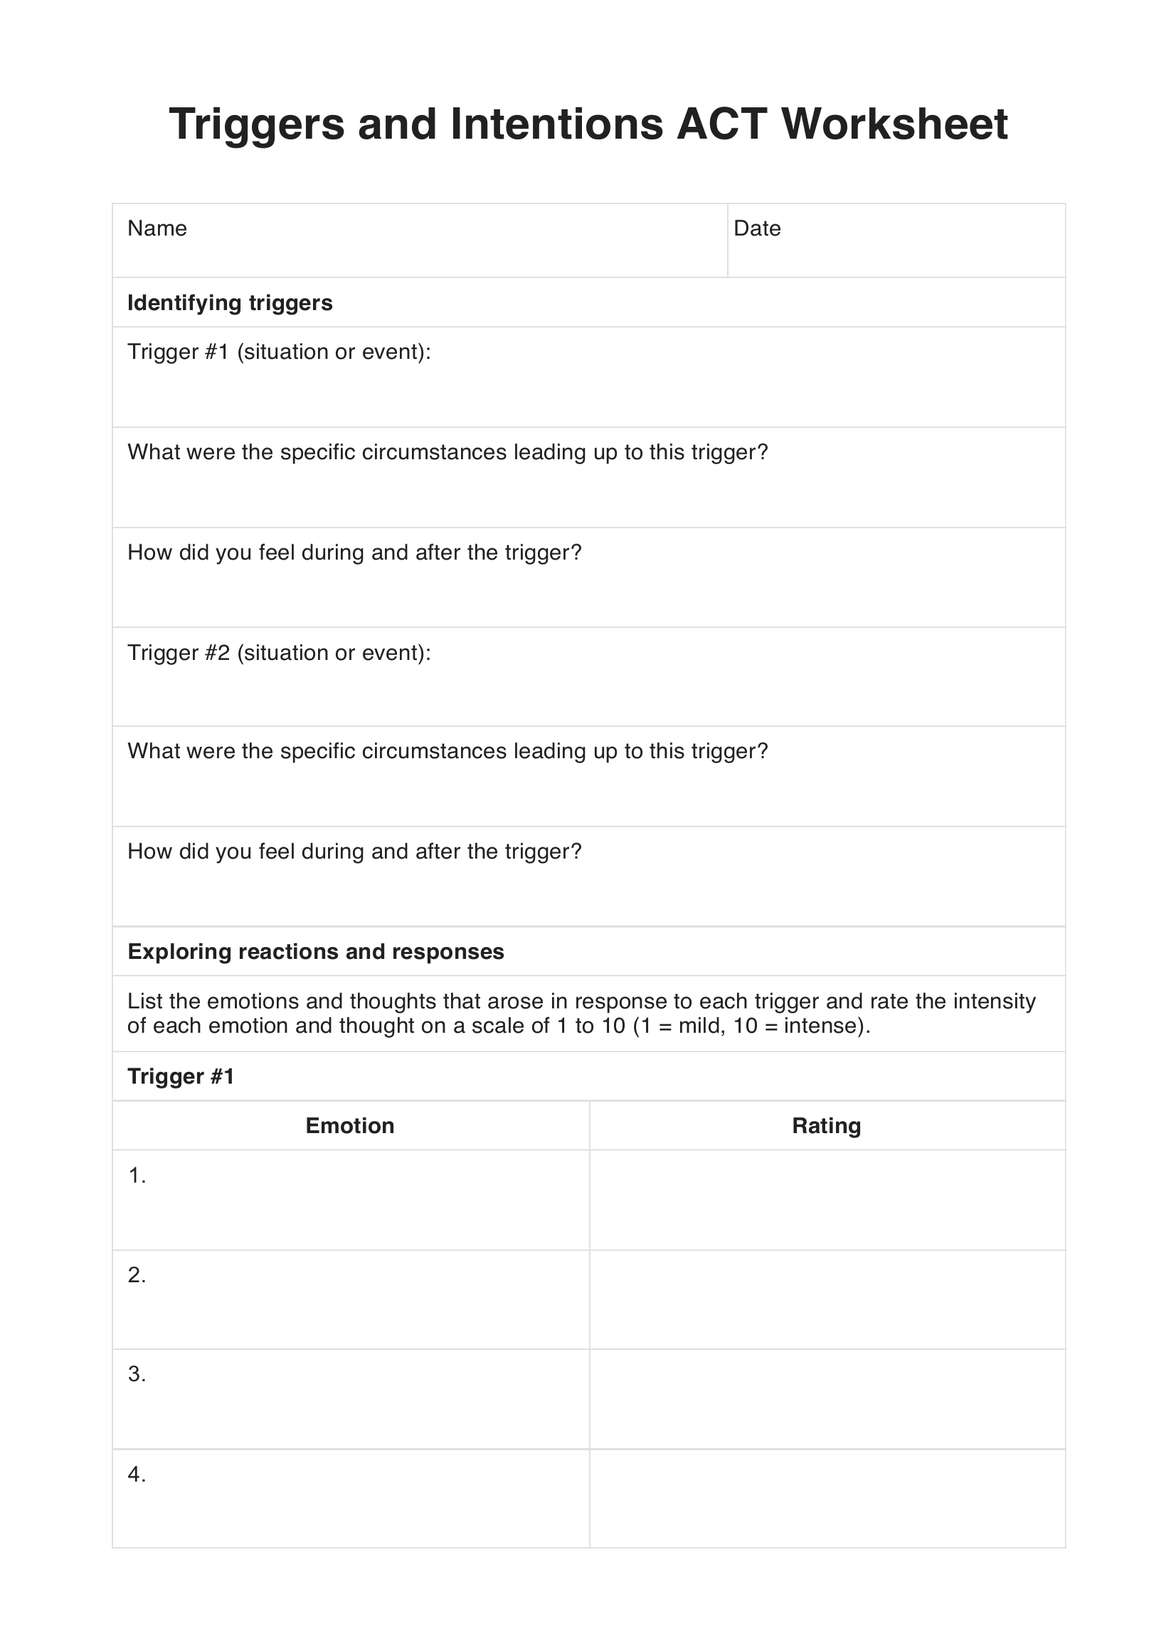 Triggers and Intentions ACT Worksheet PDF Example